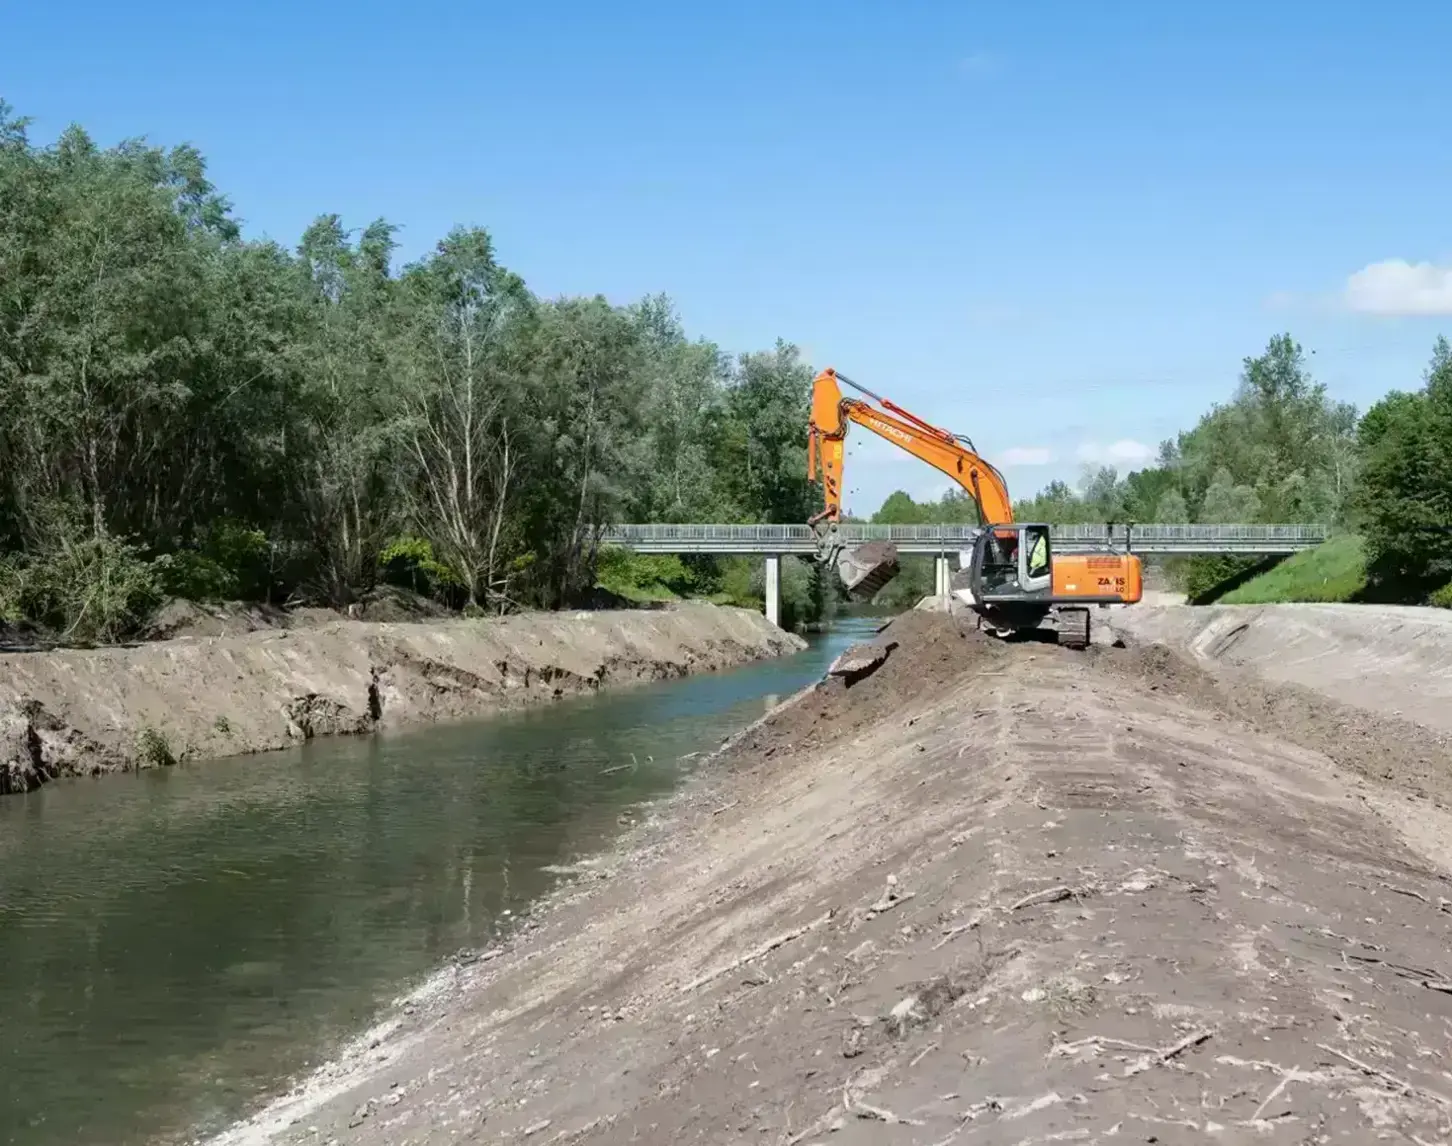 An excavator is being used during the construction of the Abwinden-Asten fish migration aid near the river.